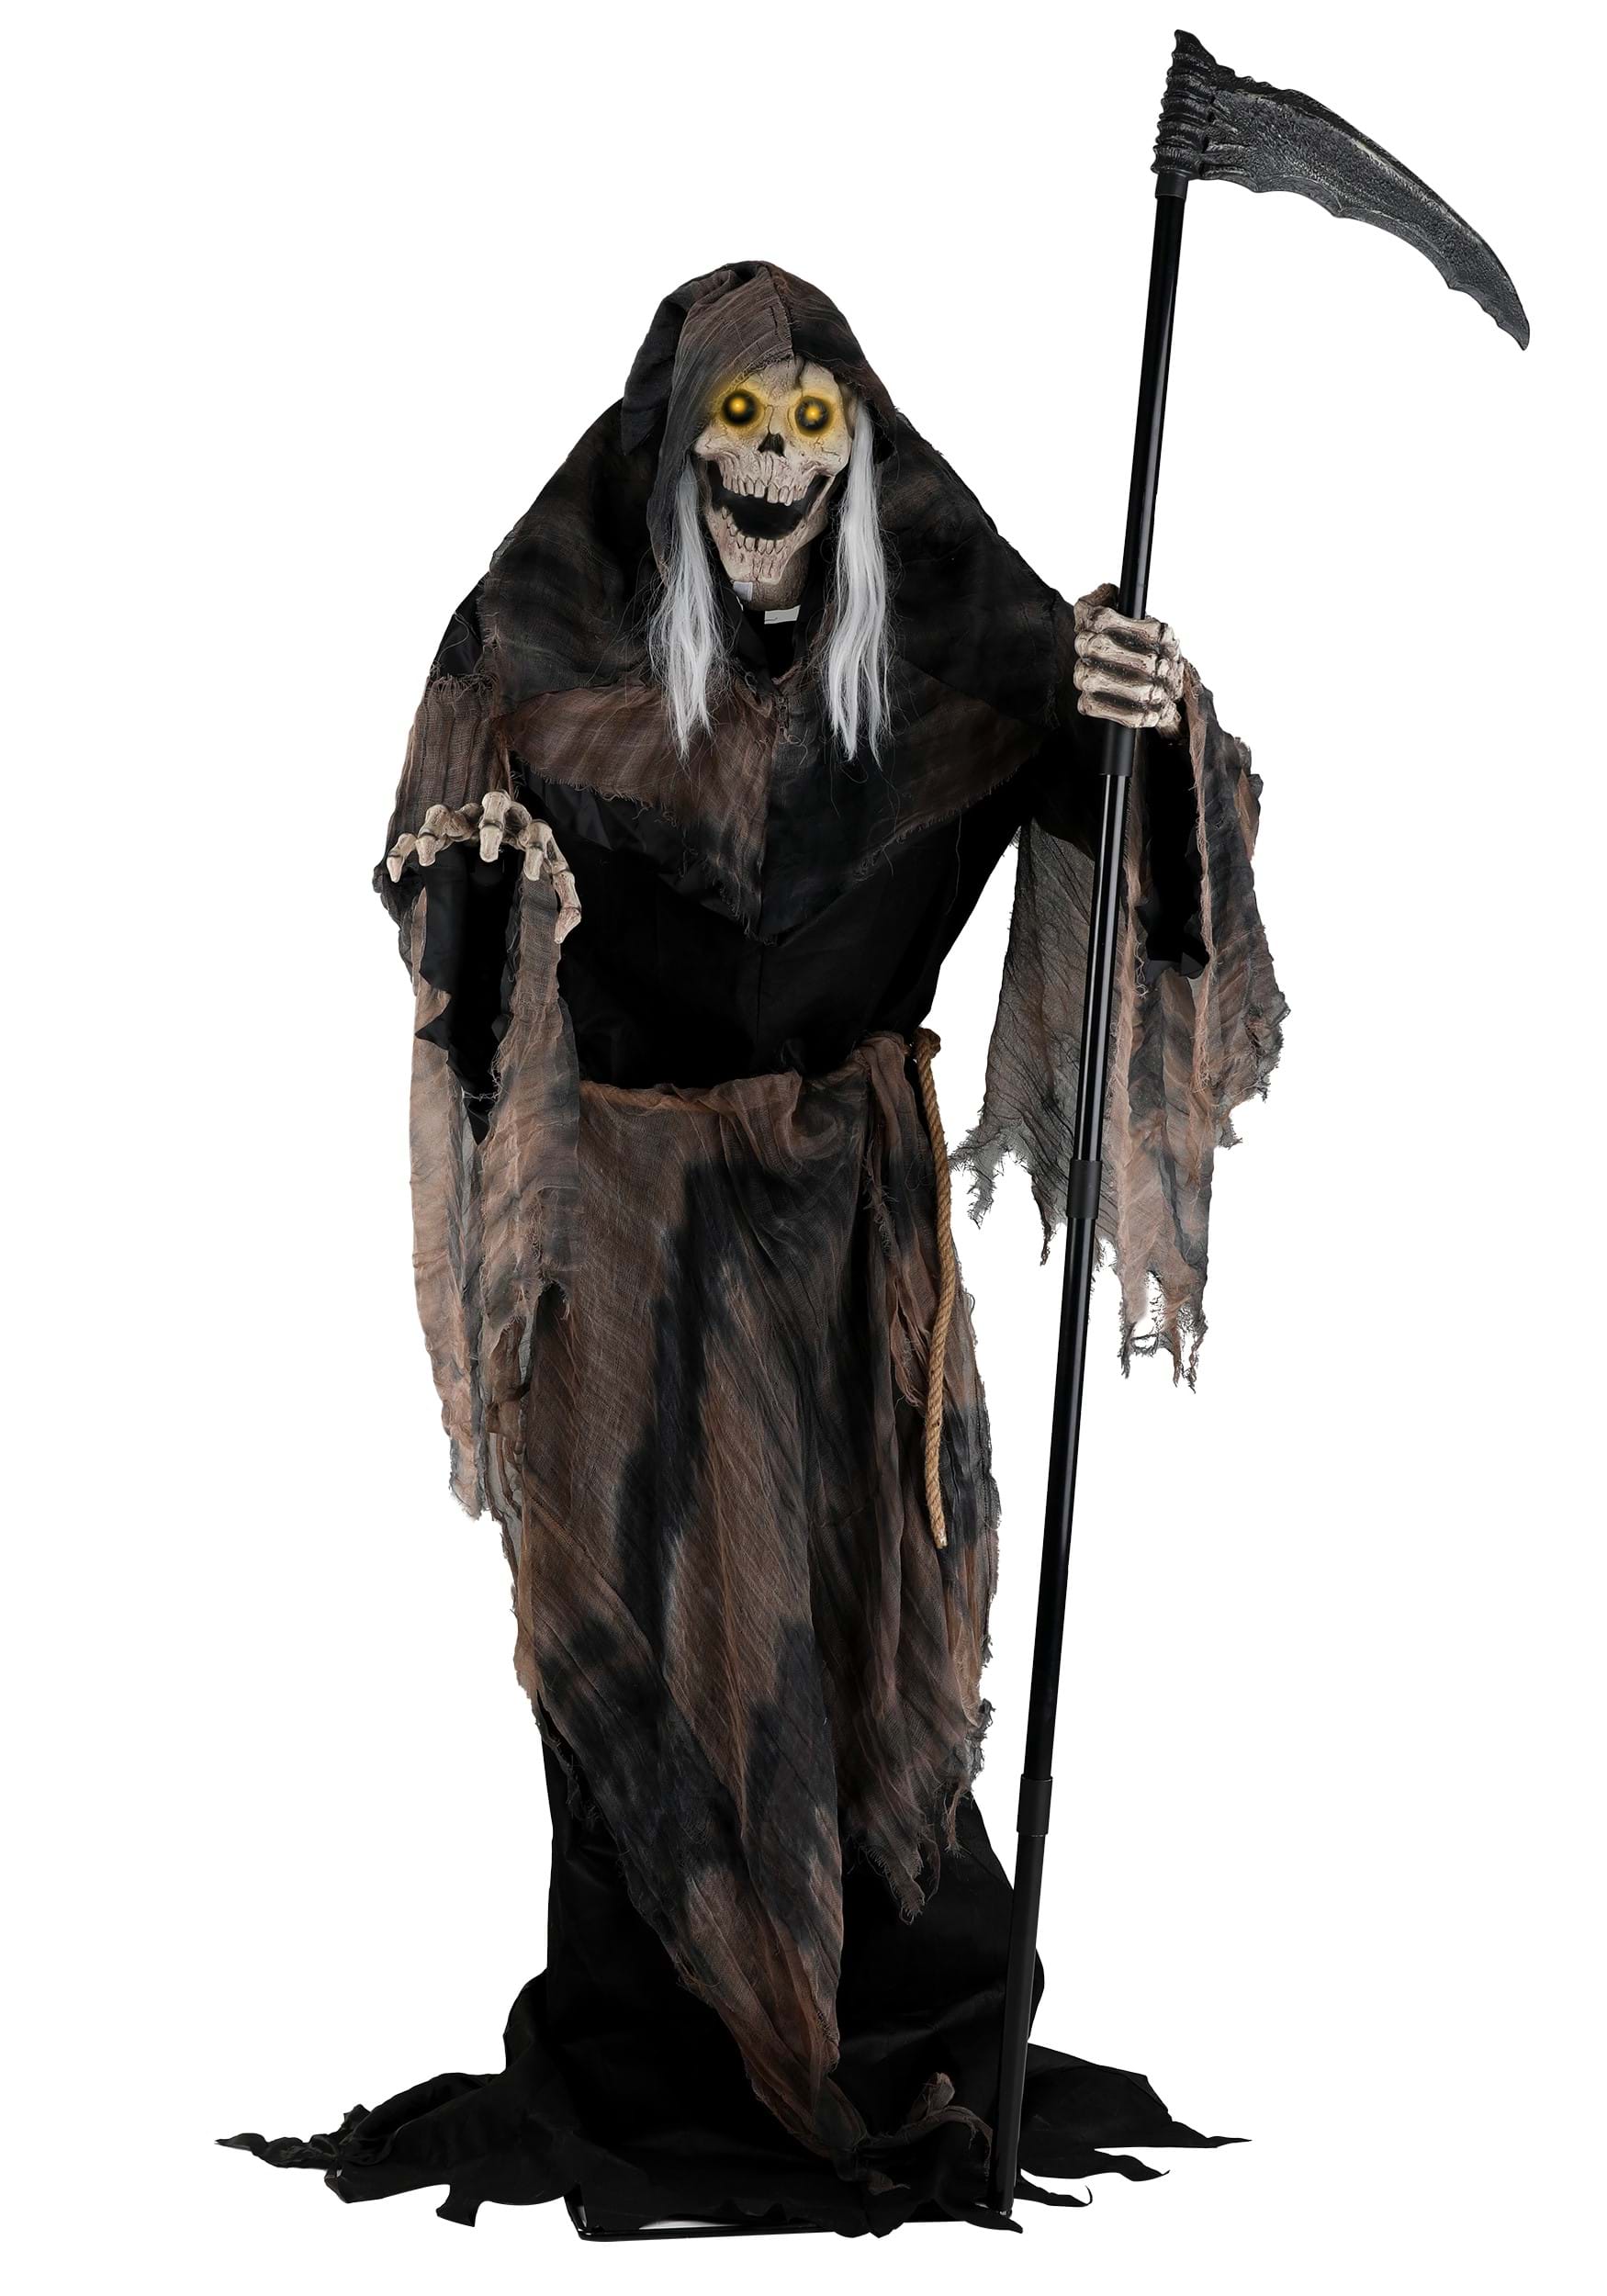 6 Foot Lunging Reaper Animated Halloween Decoration | Seasonal Visions ...